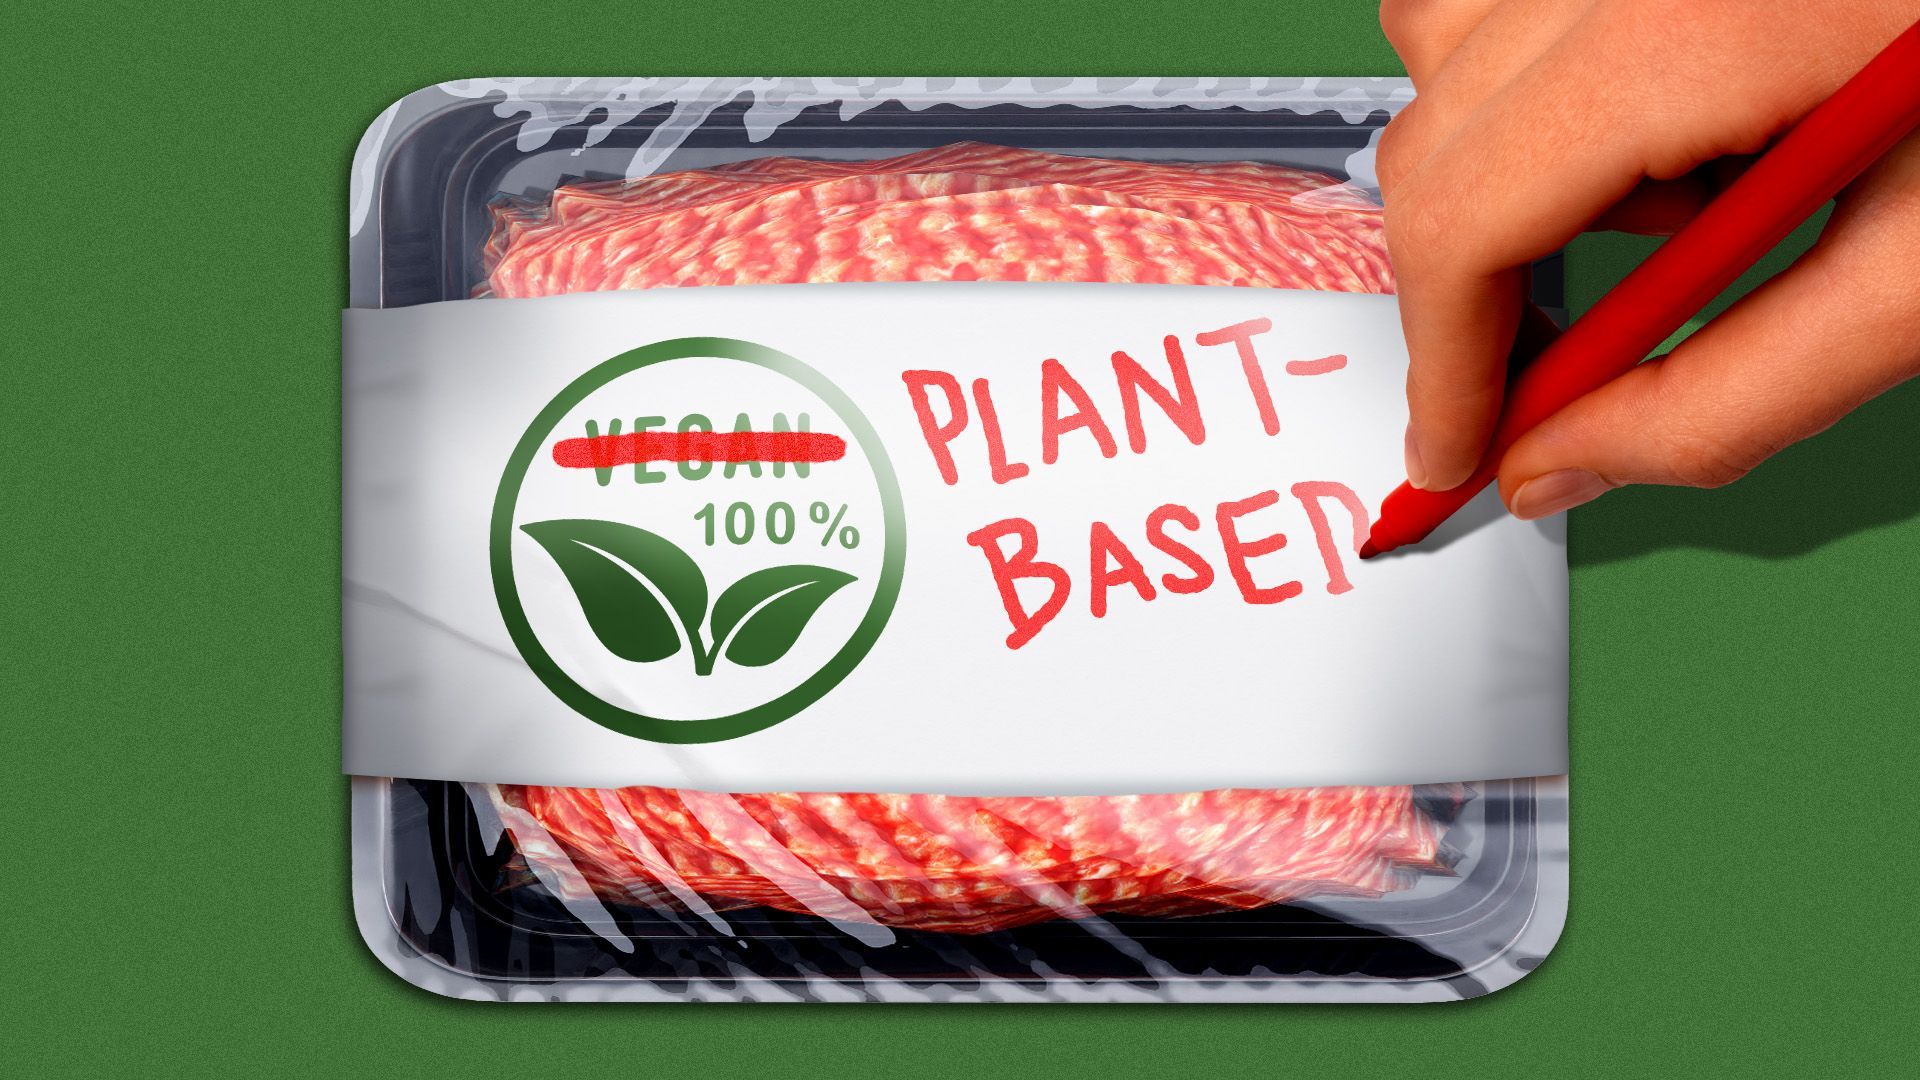 Illustration of a package of meat with the label "vegan" crossed out by a hand writing "plant-based" beside it